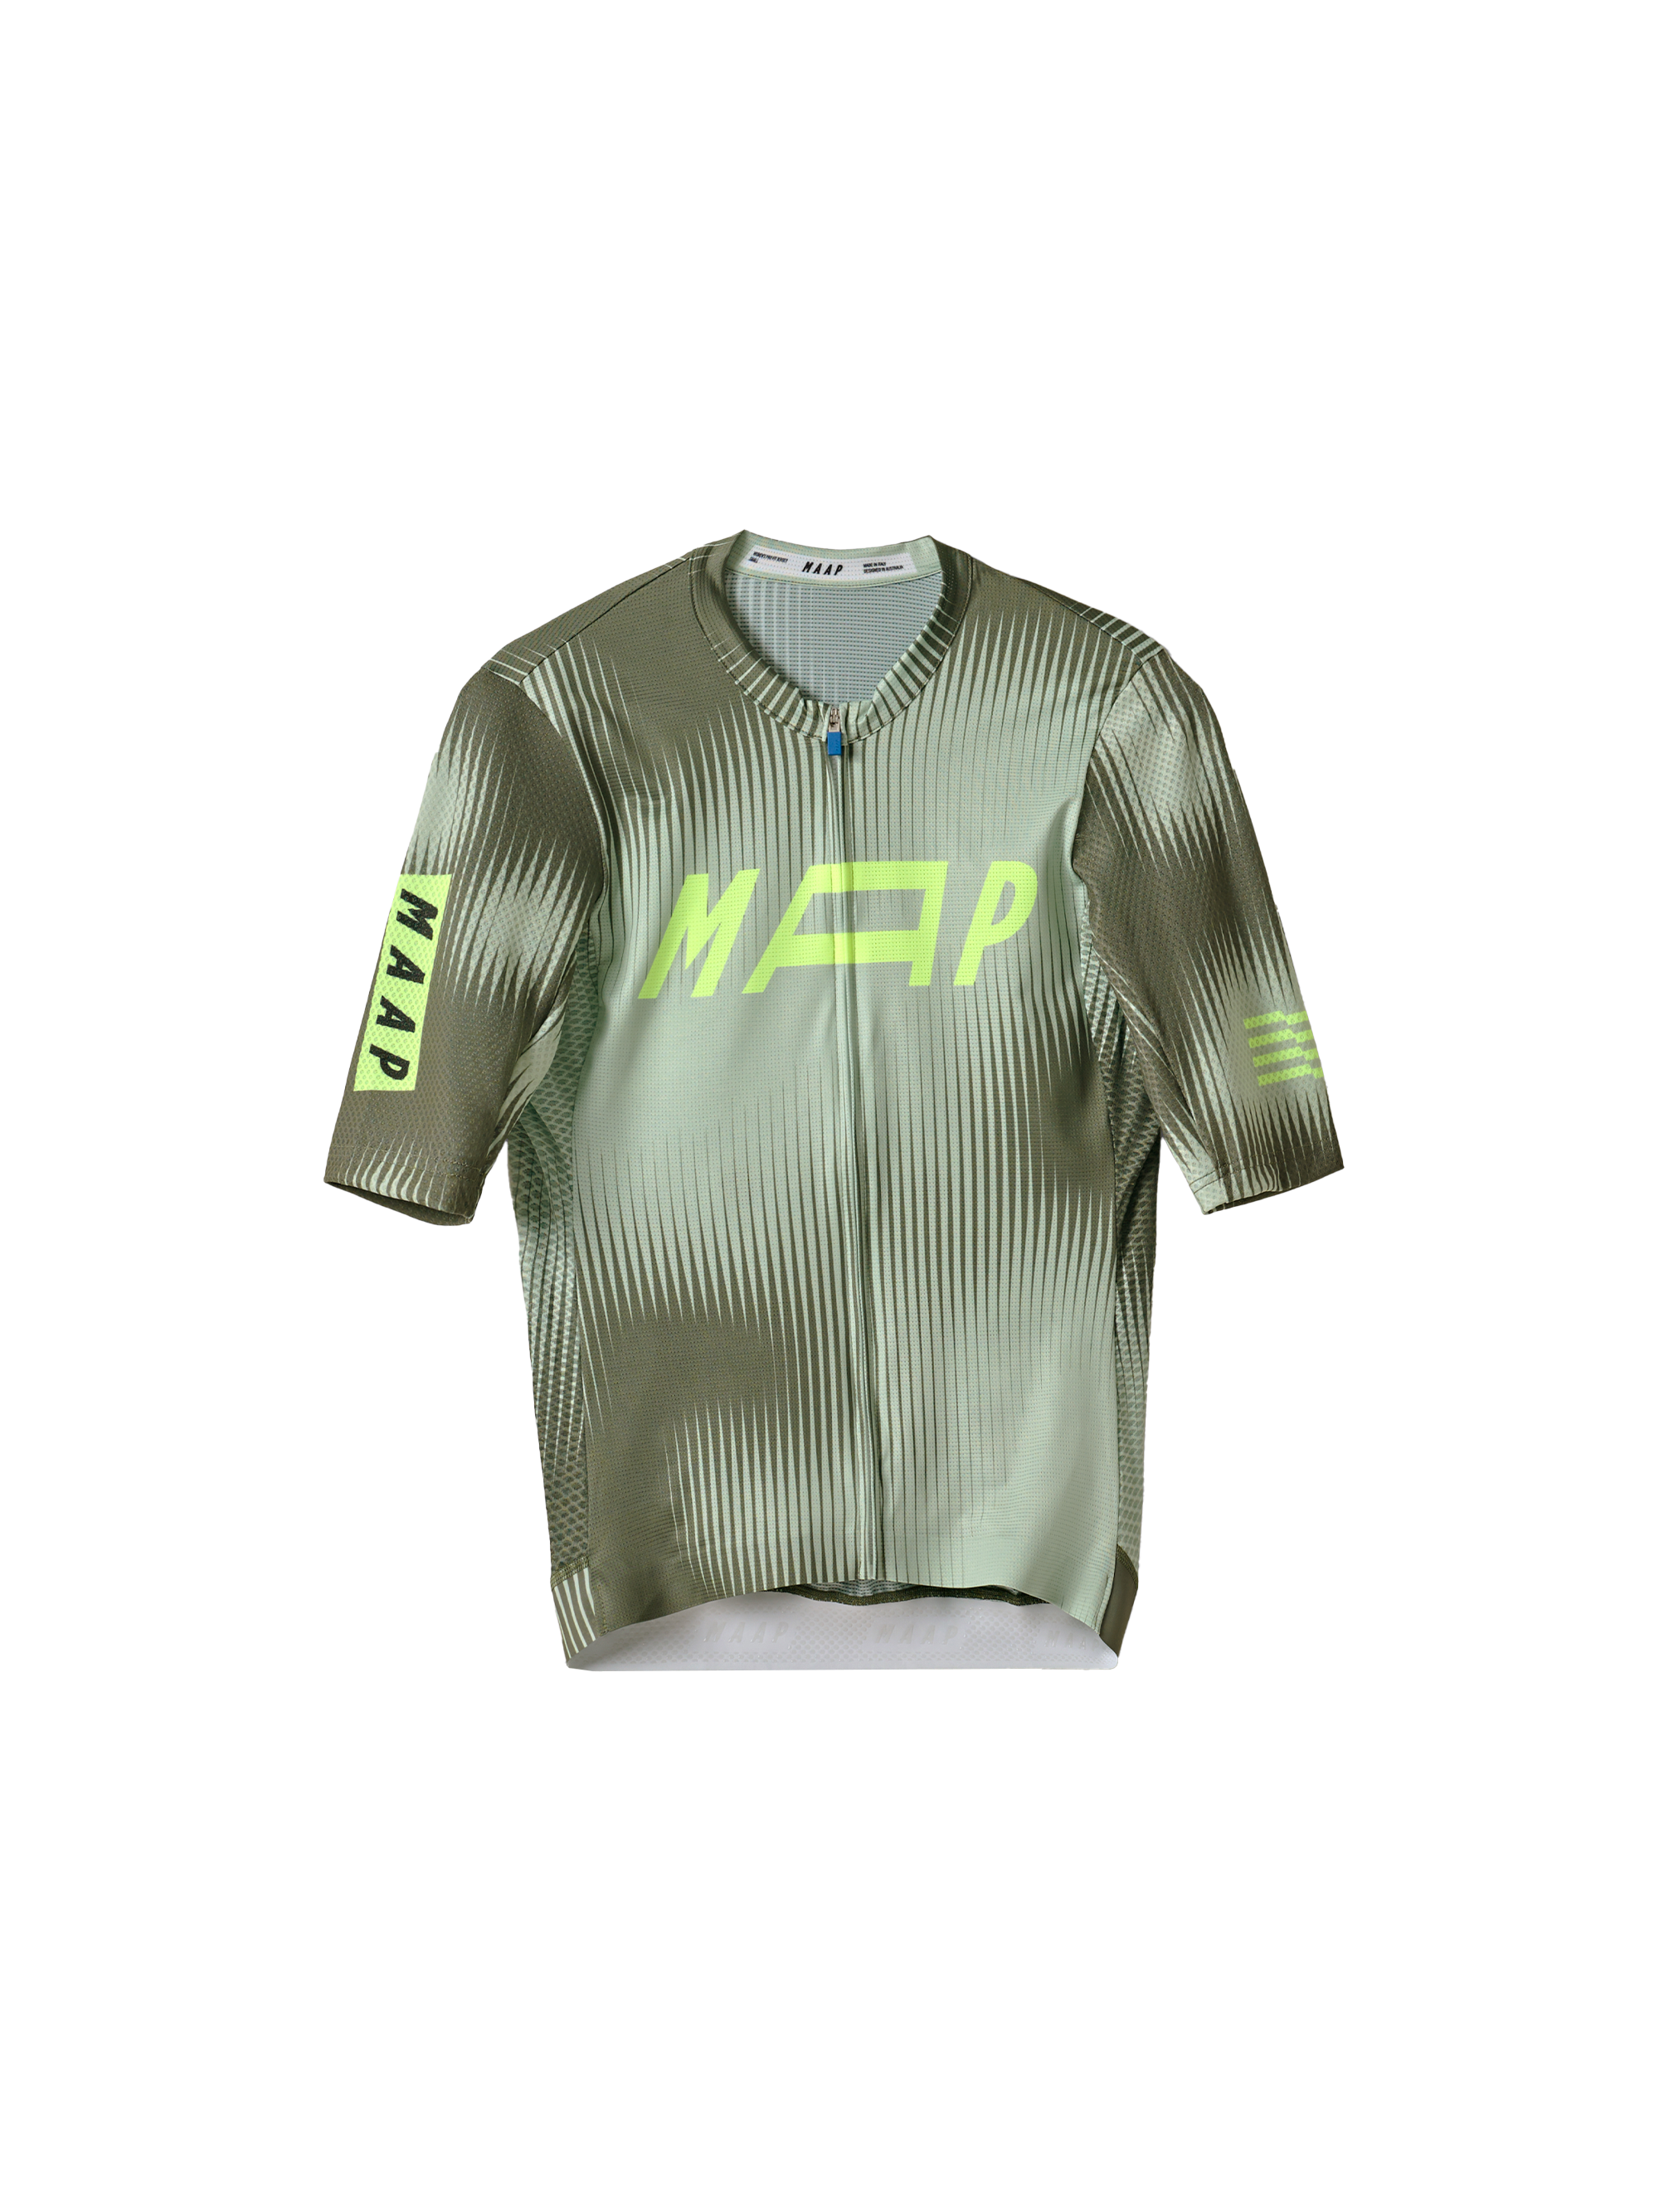 Women's Privateer I.S Pro Jersey